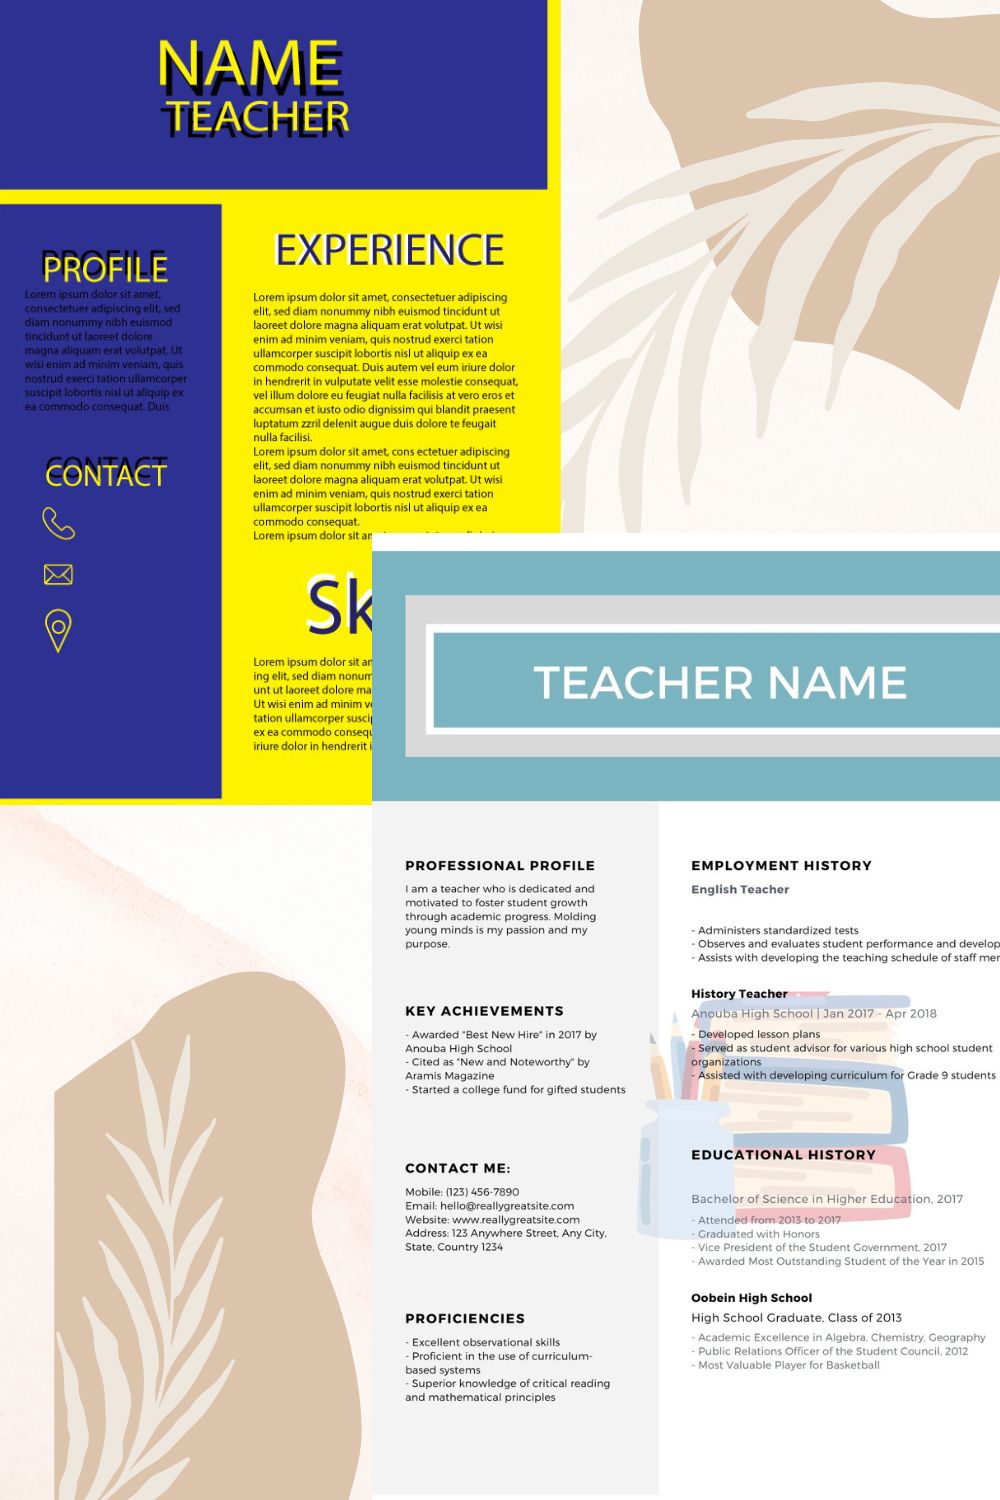 Blue and yellow resume with a name tag.